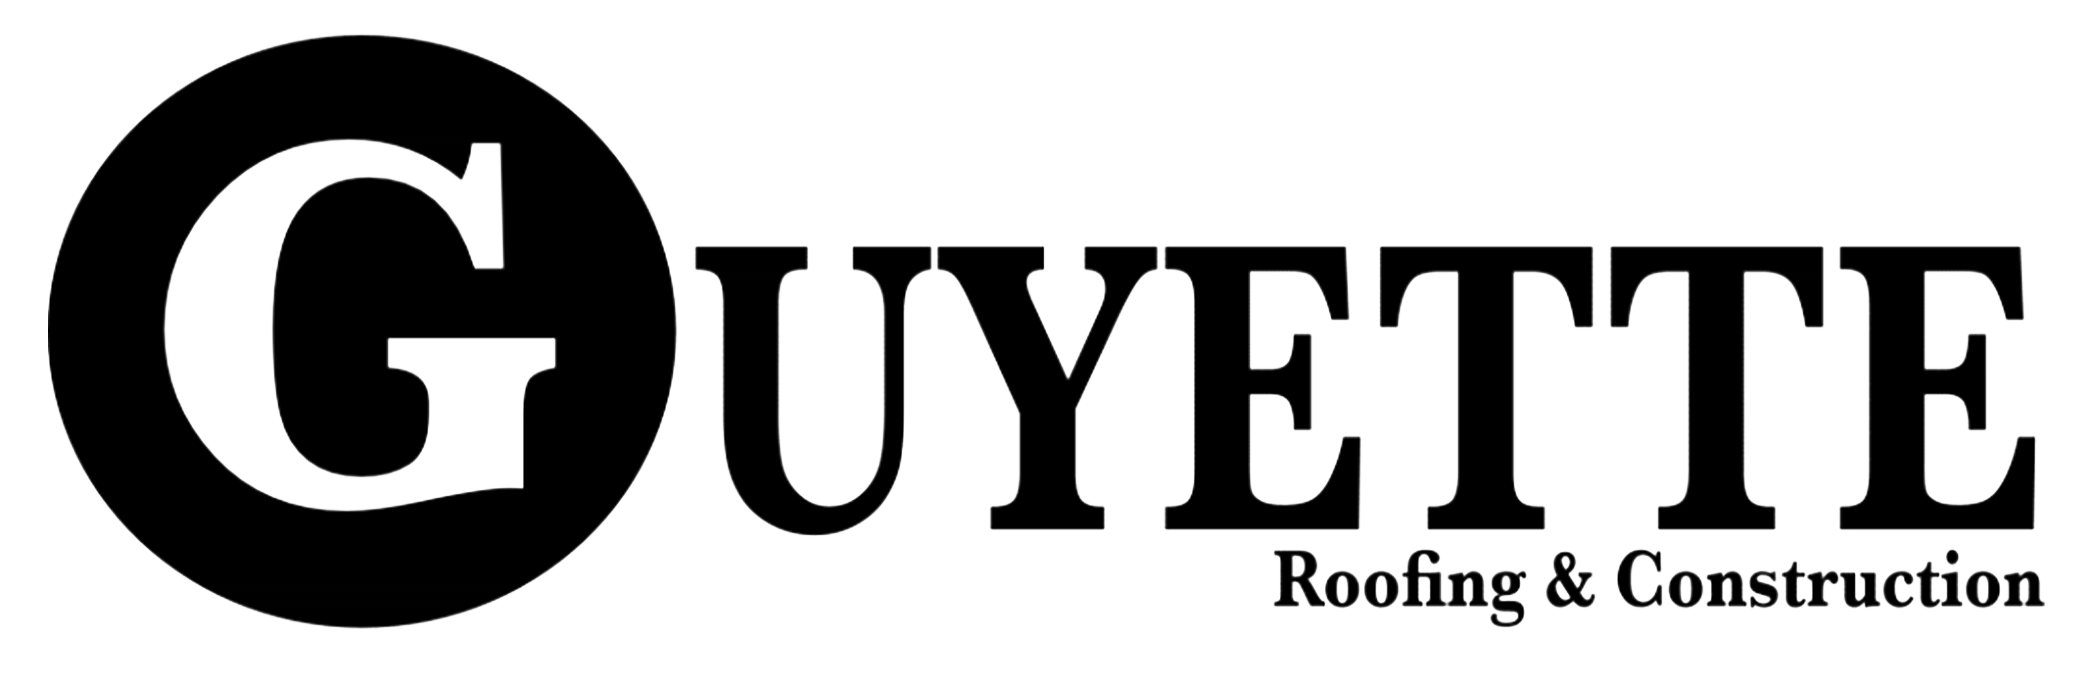 Guyette Roofing and Construction Logo